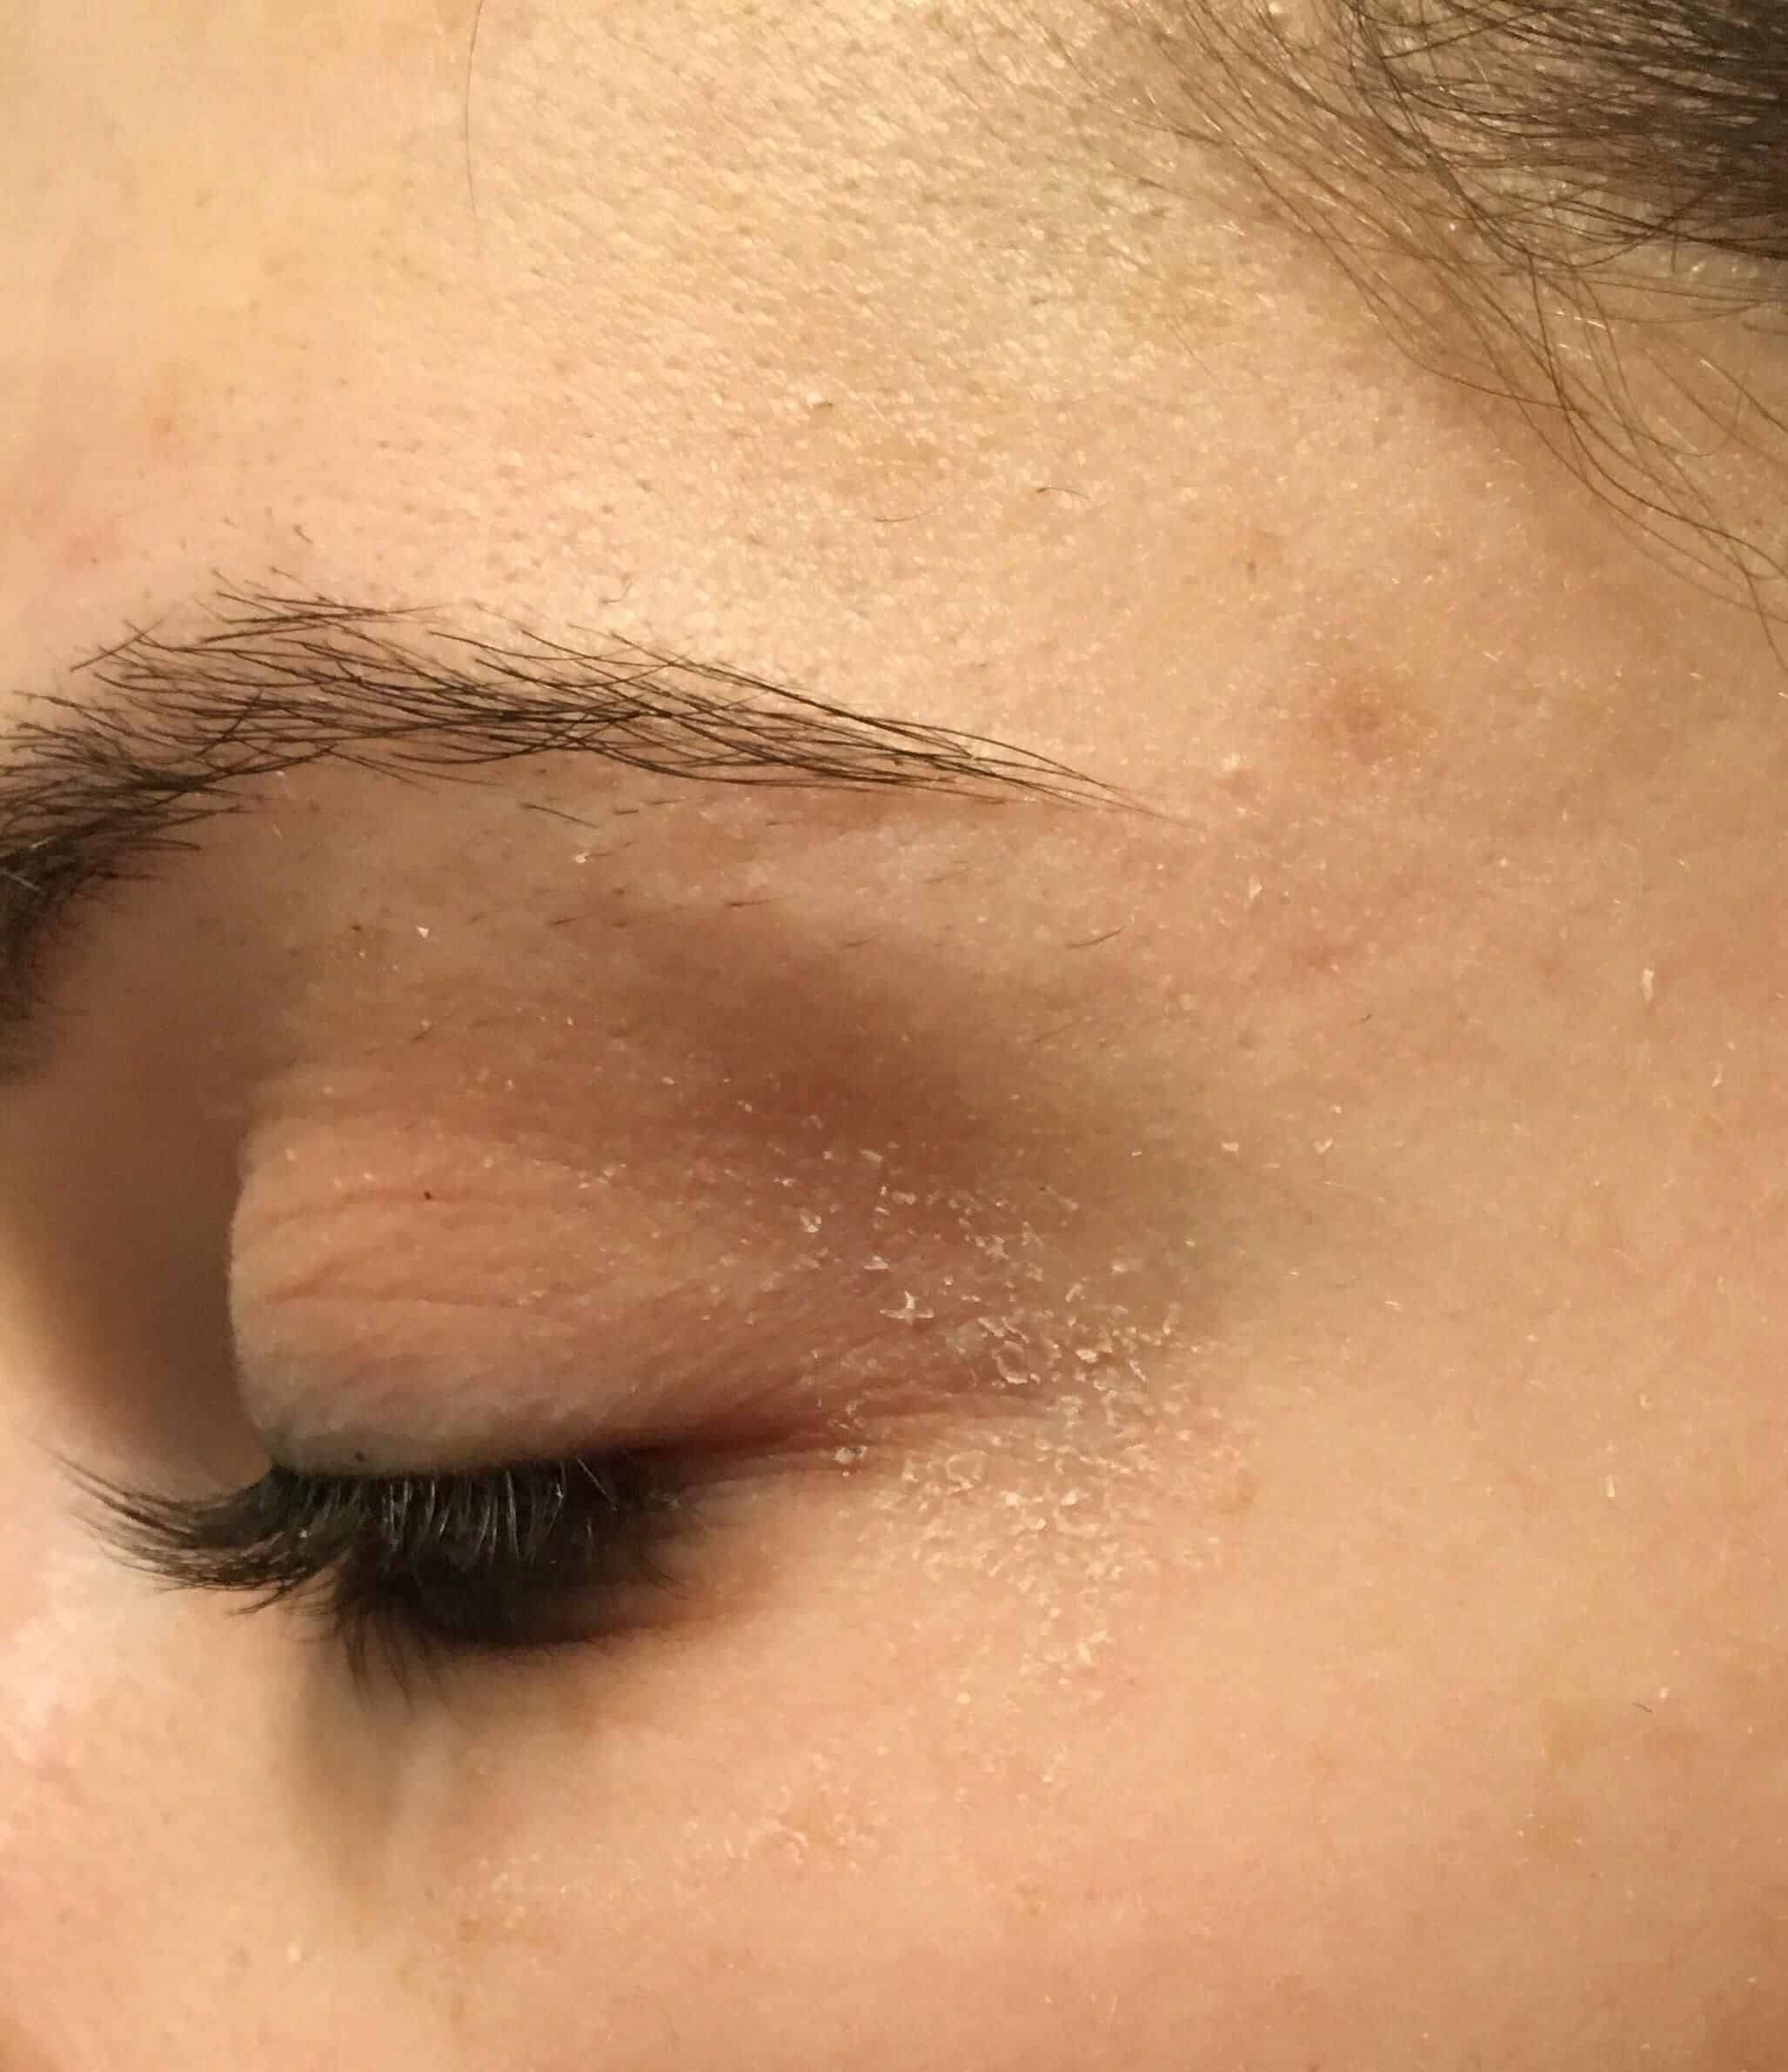 [misc] Recommendations for dry flaky skin around eyes